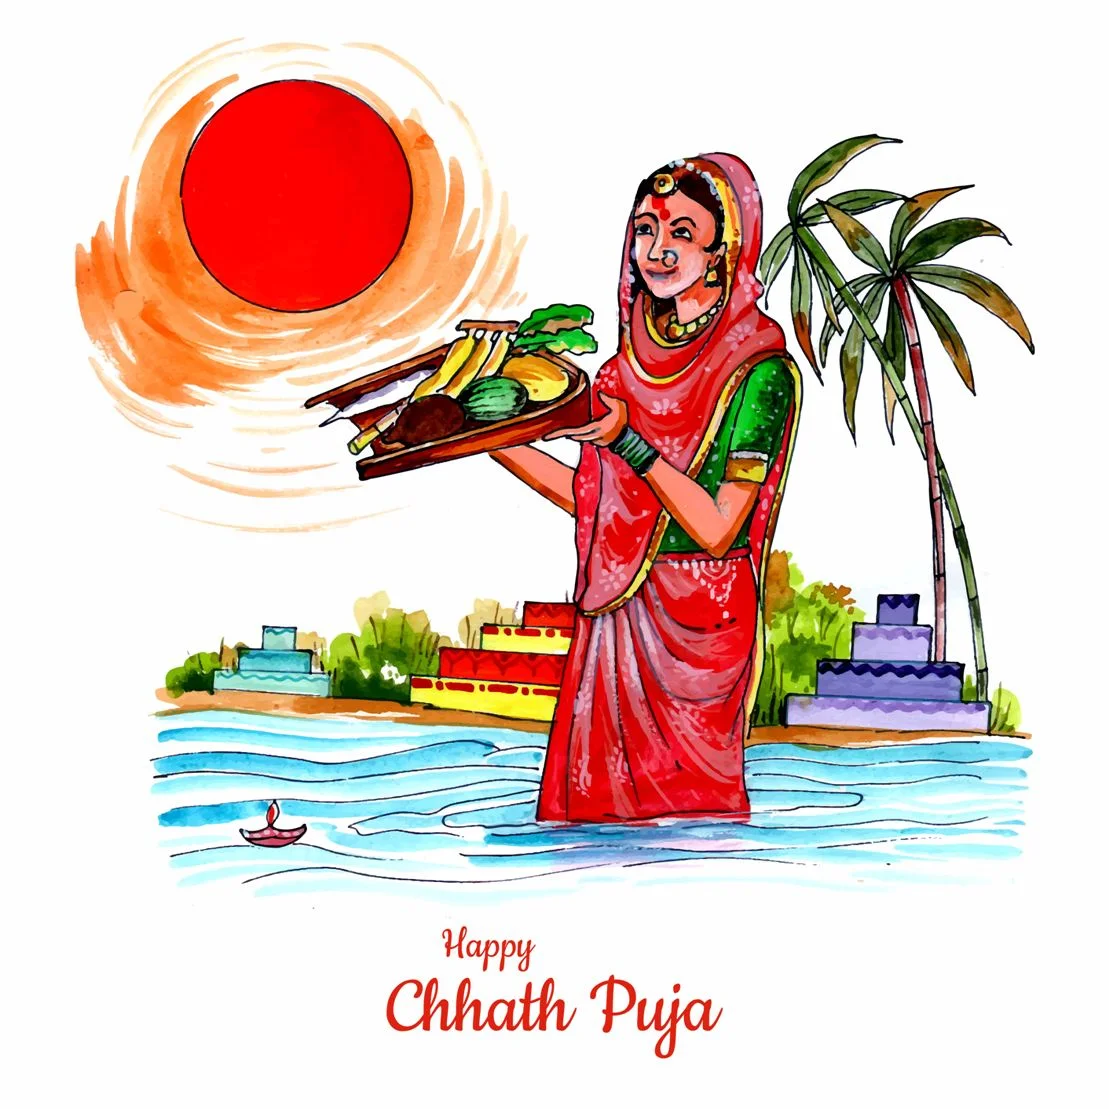 Happy Chhath Puja Wallpapers HD